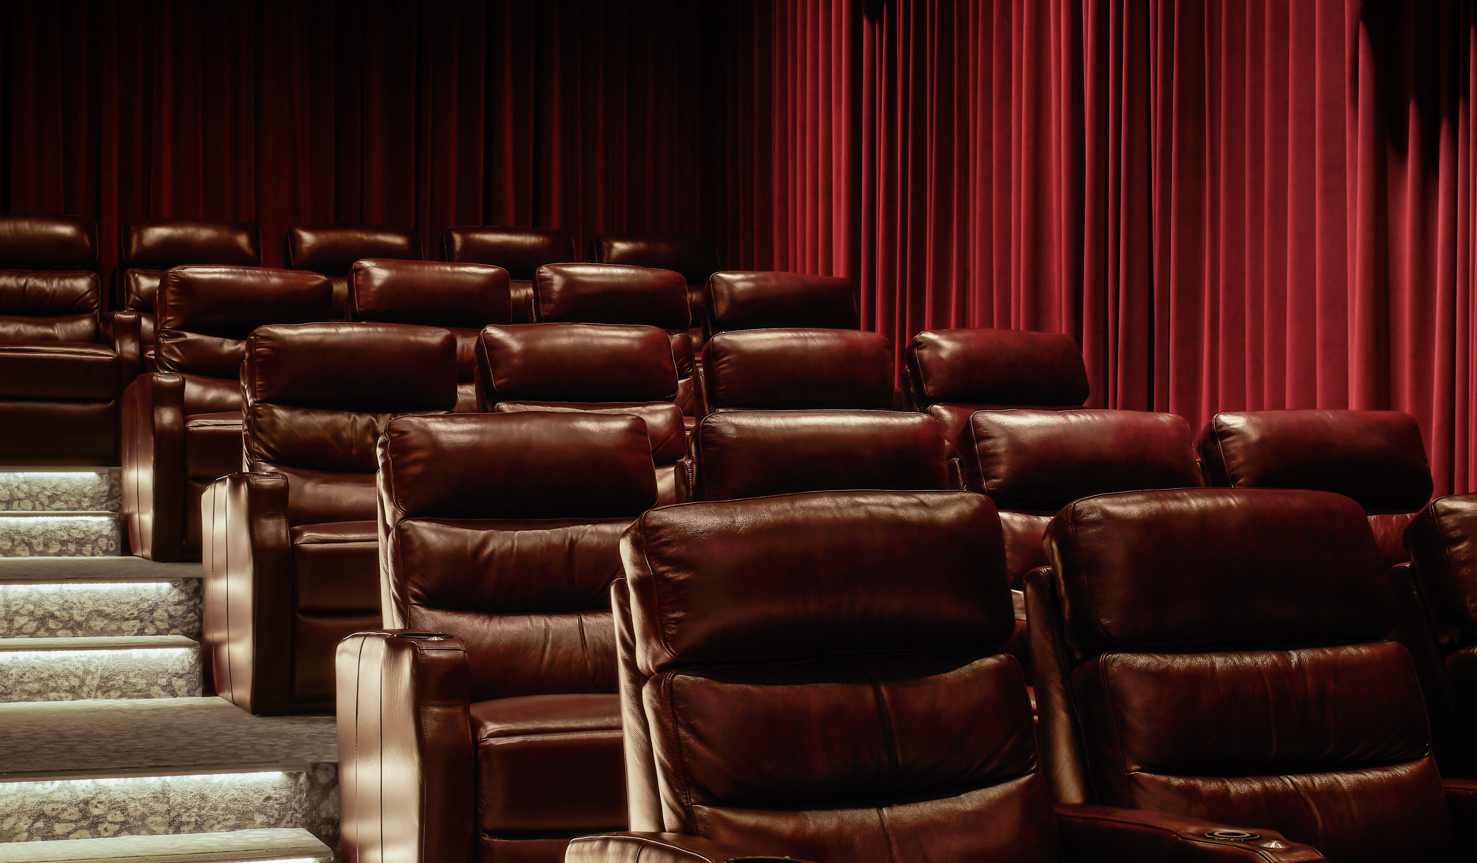 Indoor gold-class style luxurious cinema with dark red leather recliner chairs tiered up stairs with velvet red curtains lining the walls and intimate lighting.